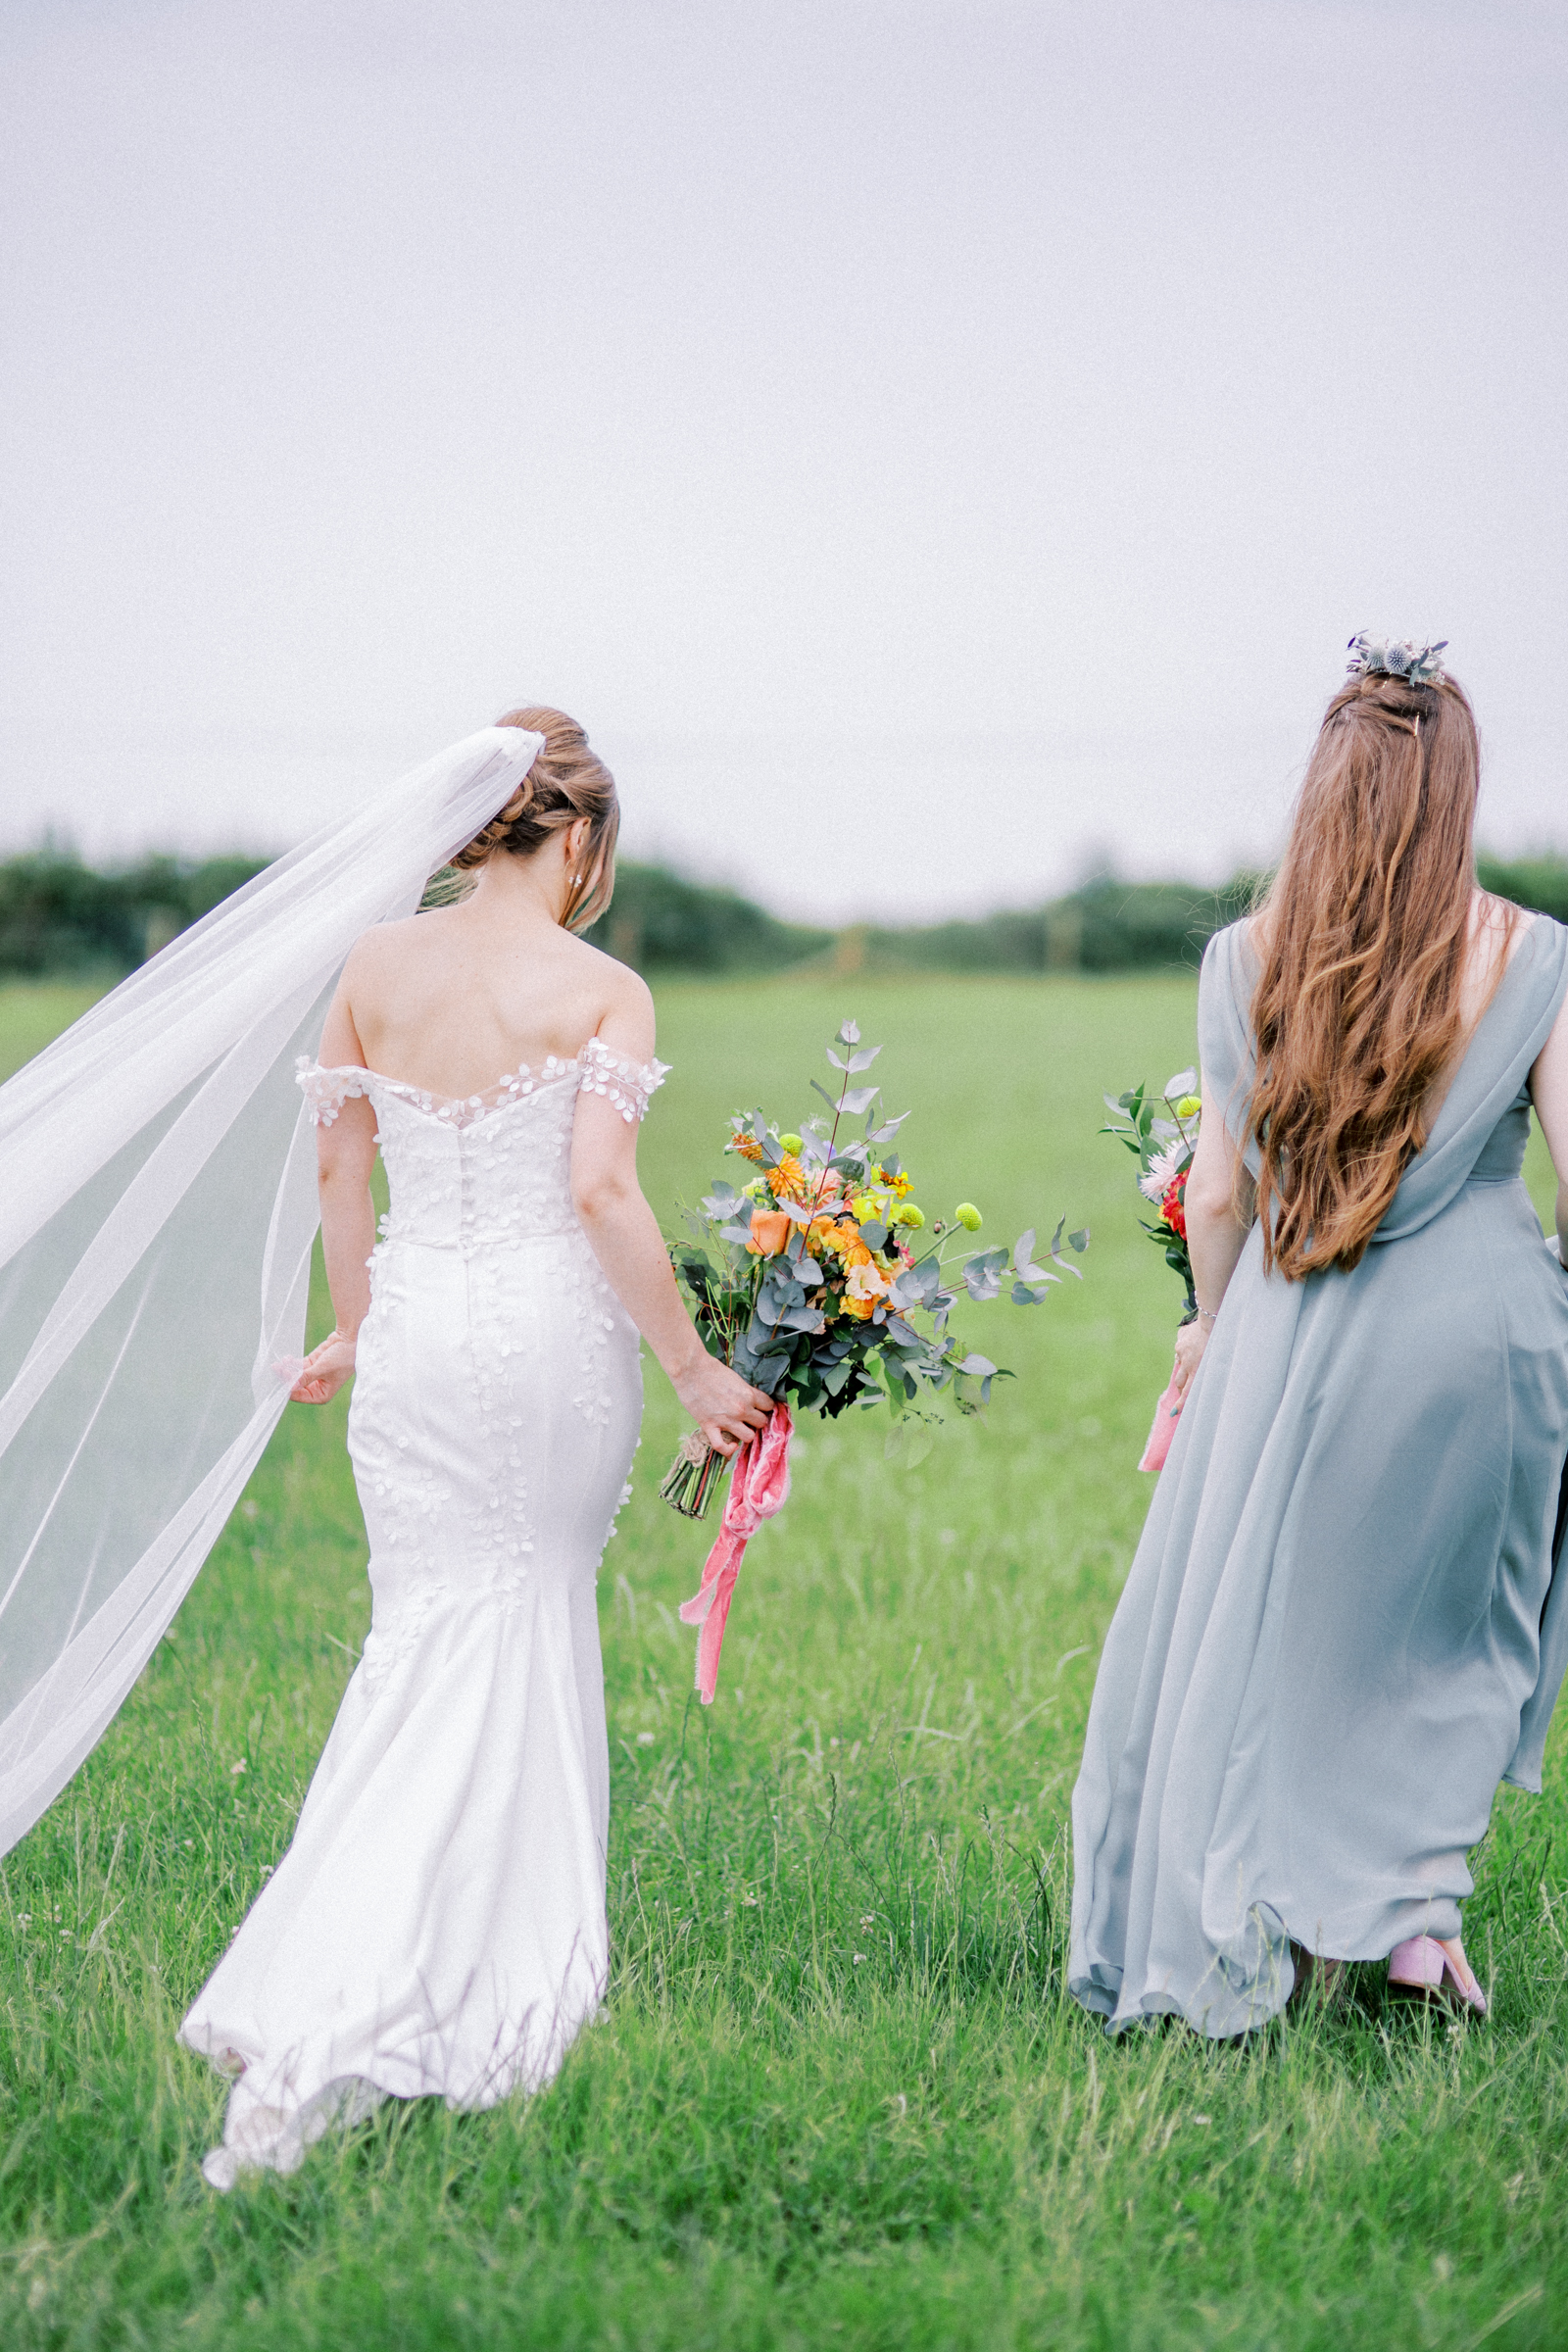 South Stoke Barn Wedding with beautiful colourful flowers